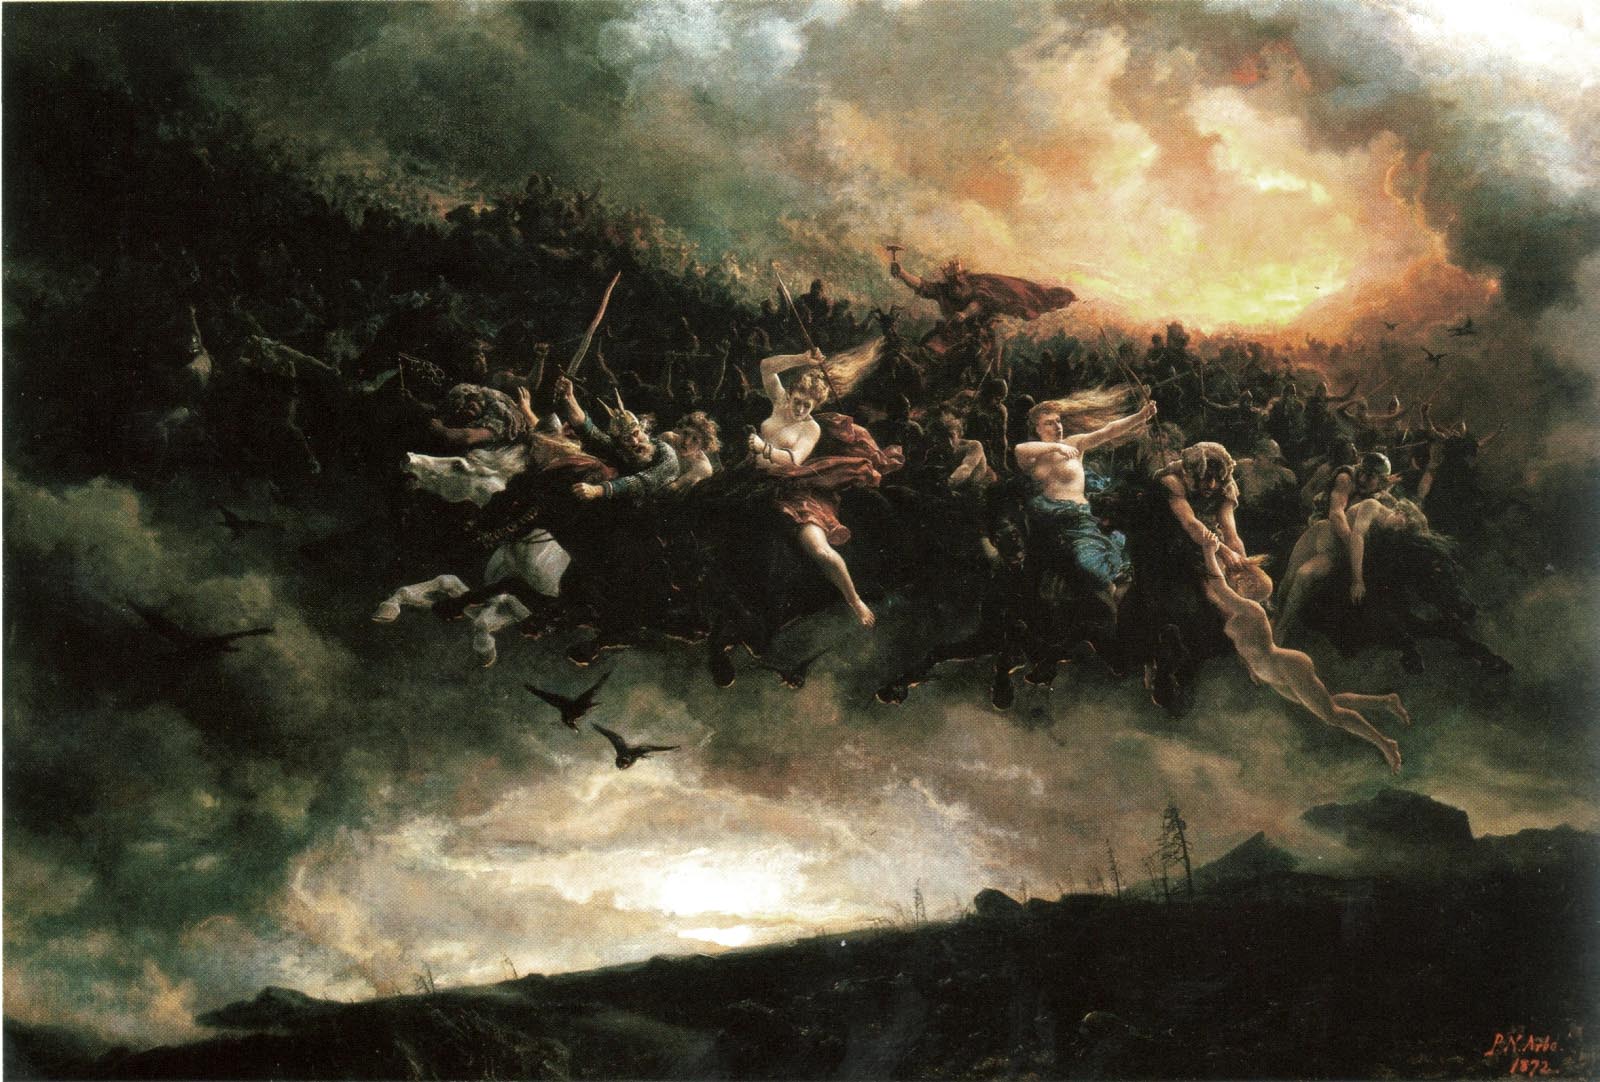 Oil on canvas rendering of the Wild Hunt, currently on display in the National Gallery, Norway © Peter Nicolai Arbo https://commons.wikimedia.org/wiki/File:Aasgaardreien_peter_nicolai_arbo_mindre.jpg